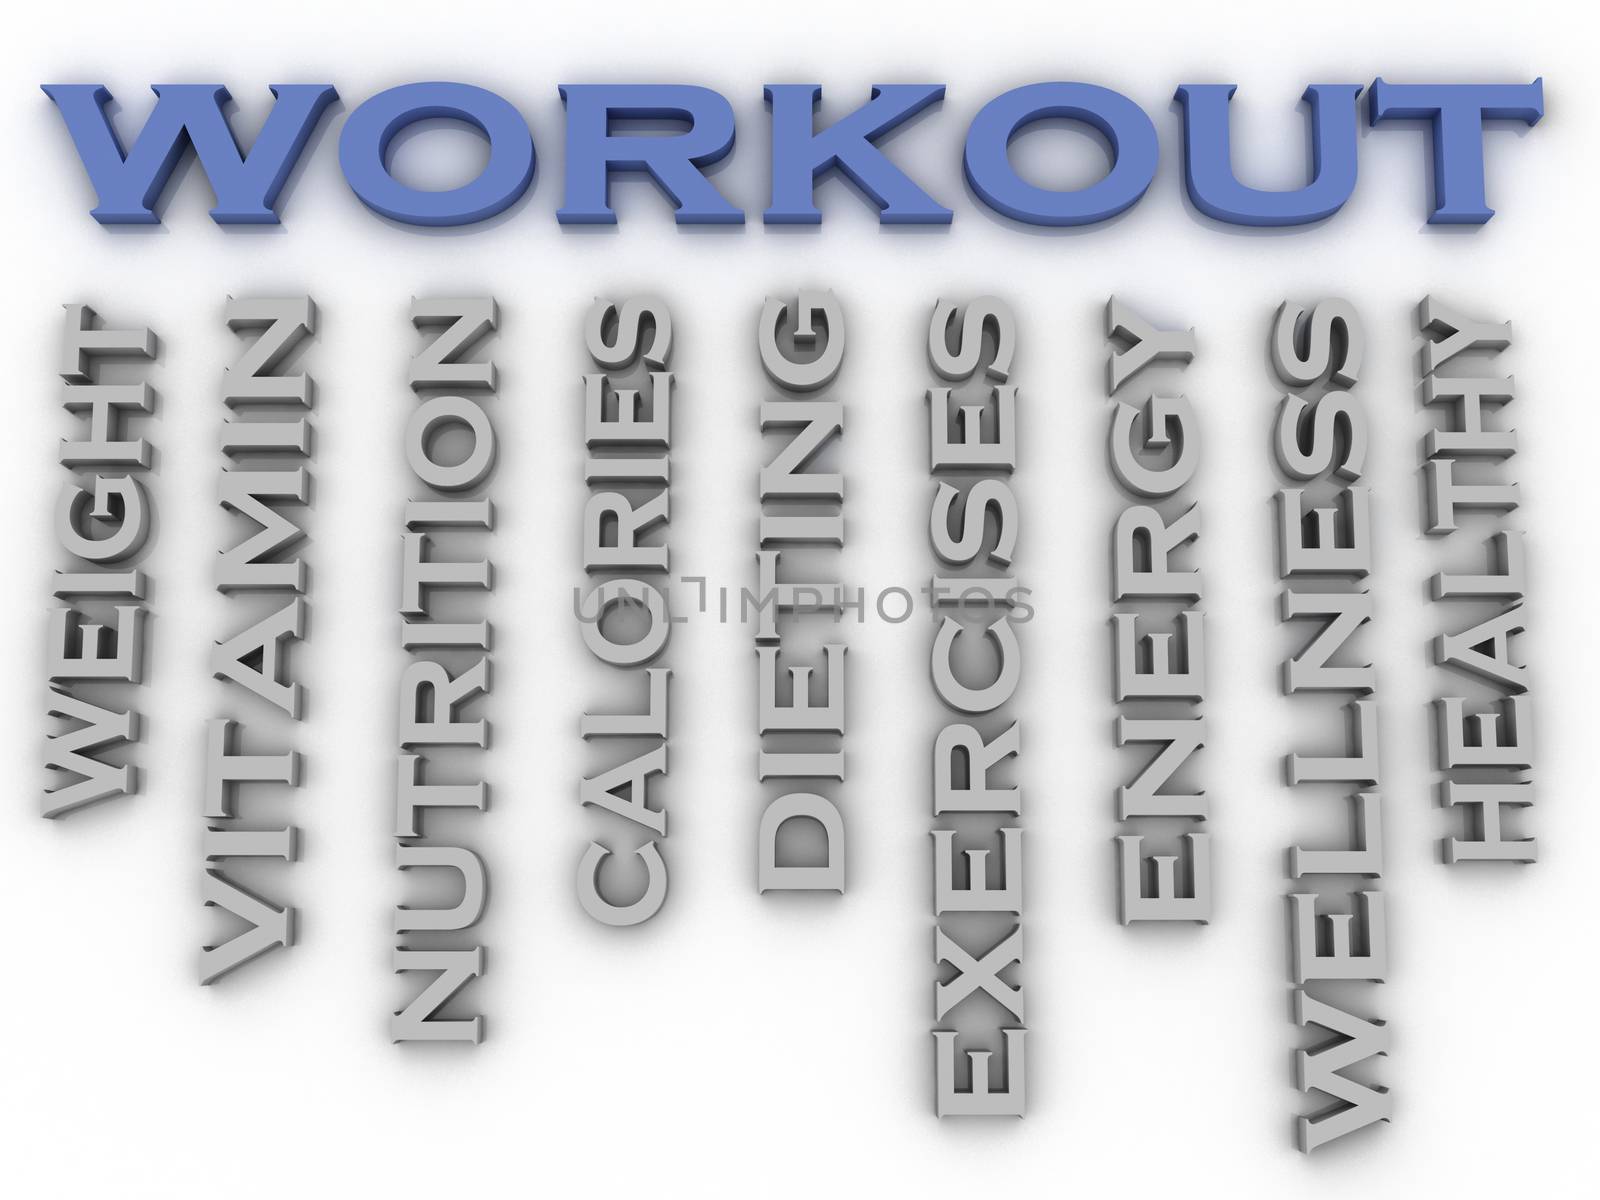 3d image Workout issues concept word cloud background by dacasdo